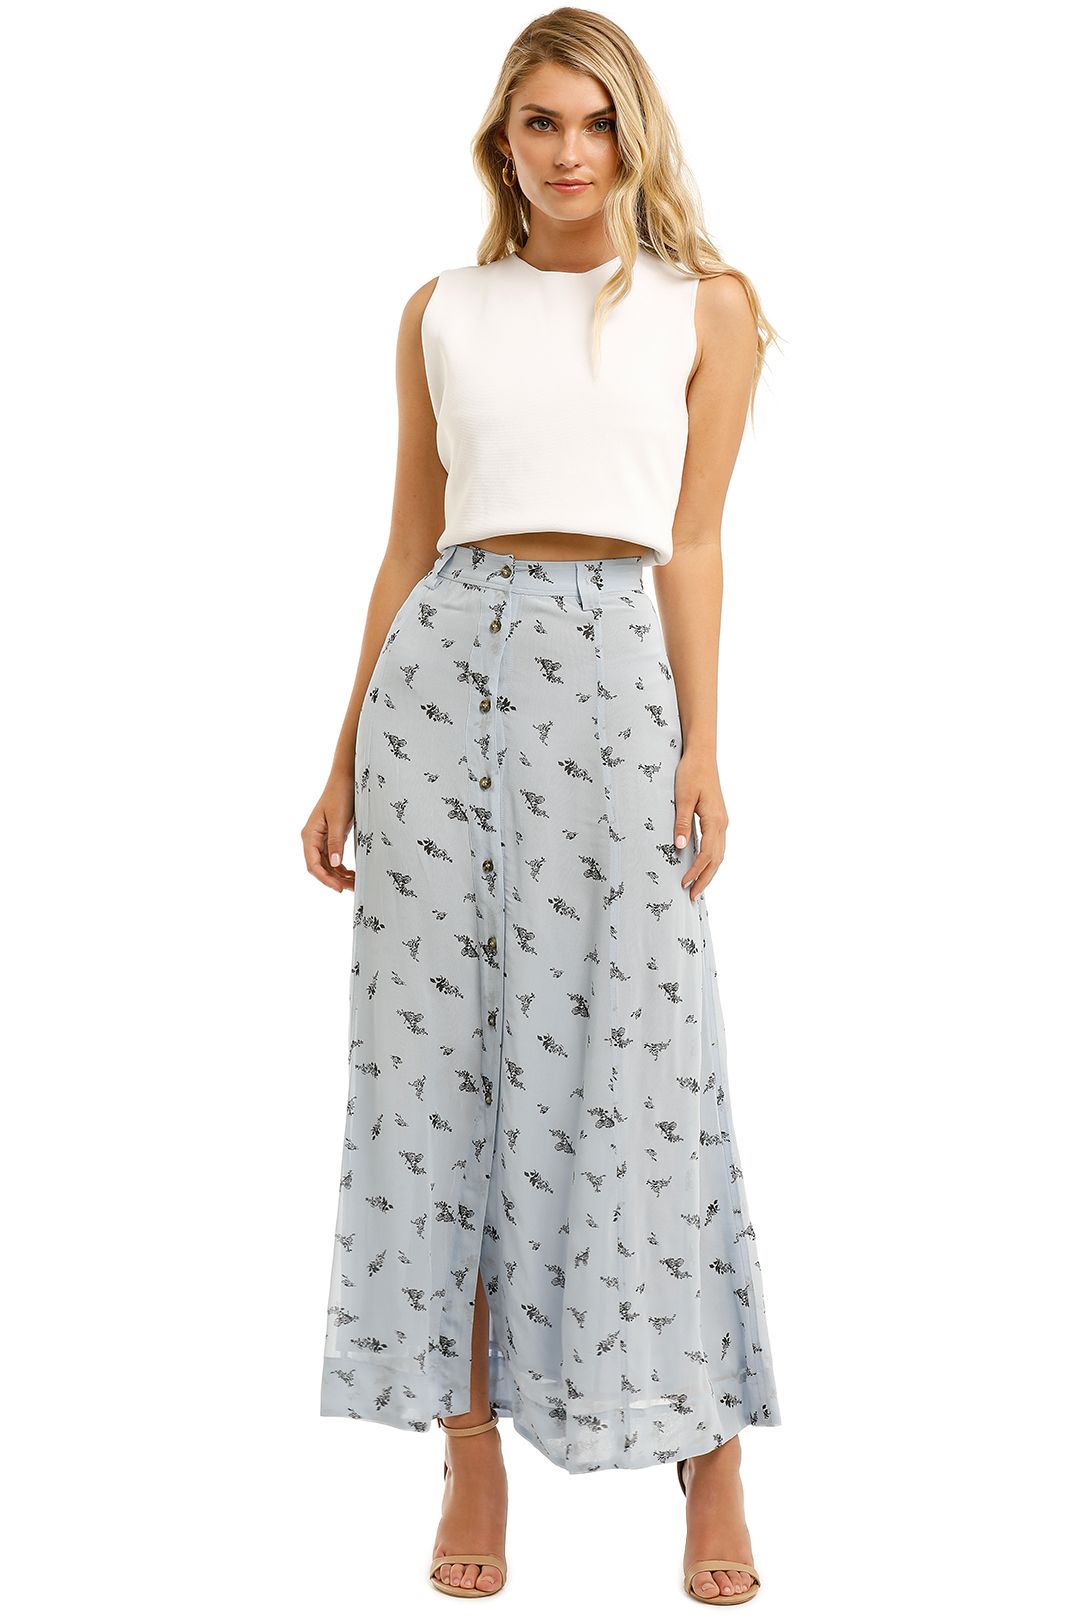 Printed Georgette Skirt in Blue by Ganni for Hire | GlamCorner